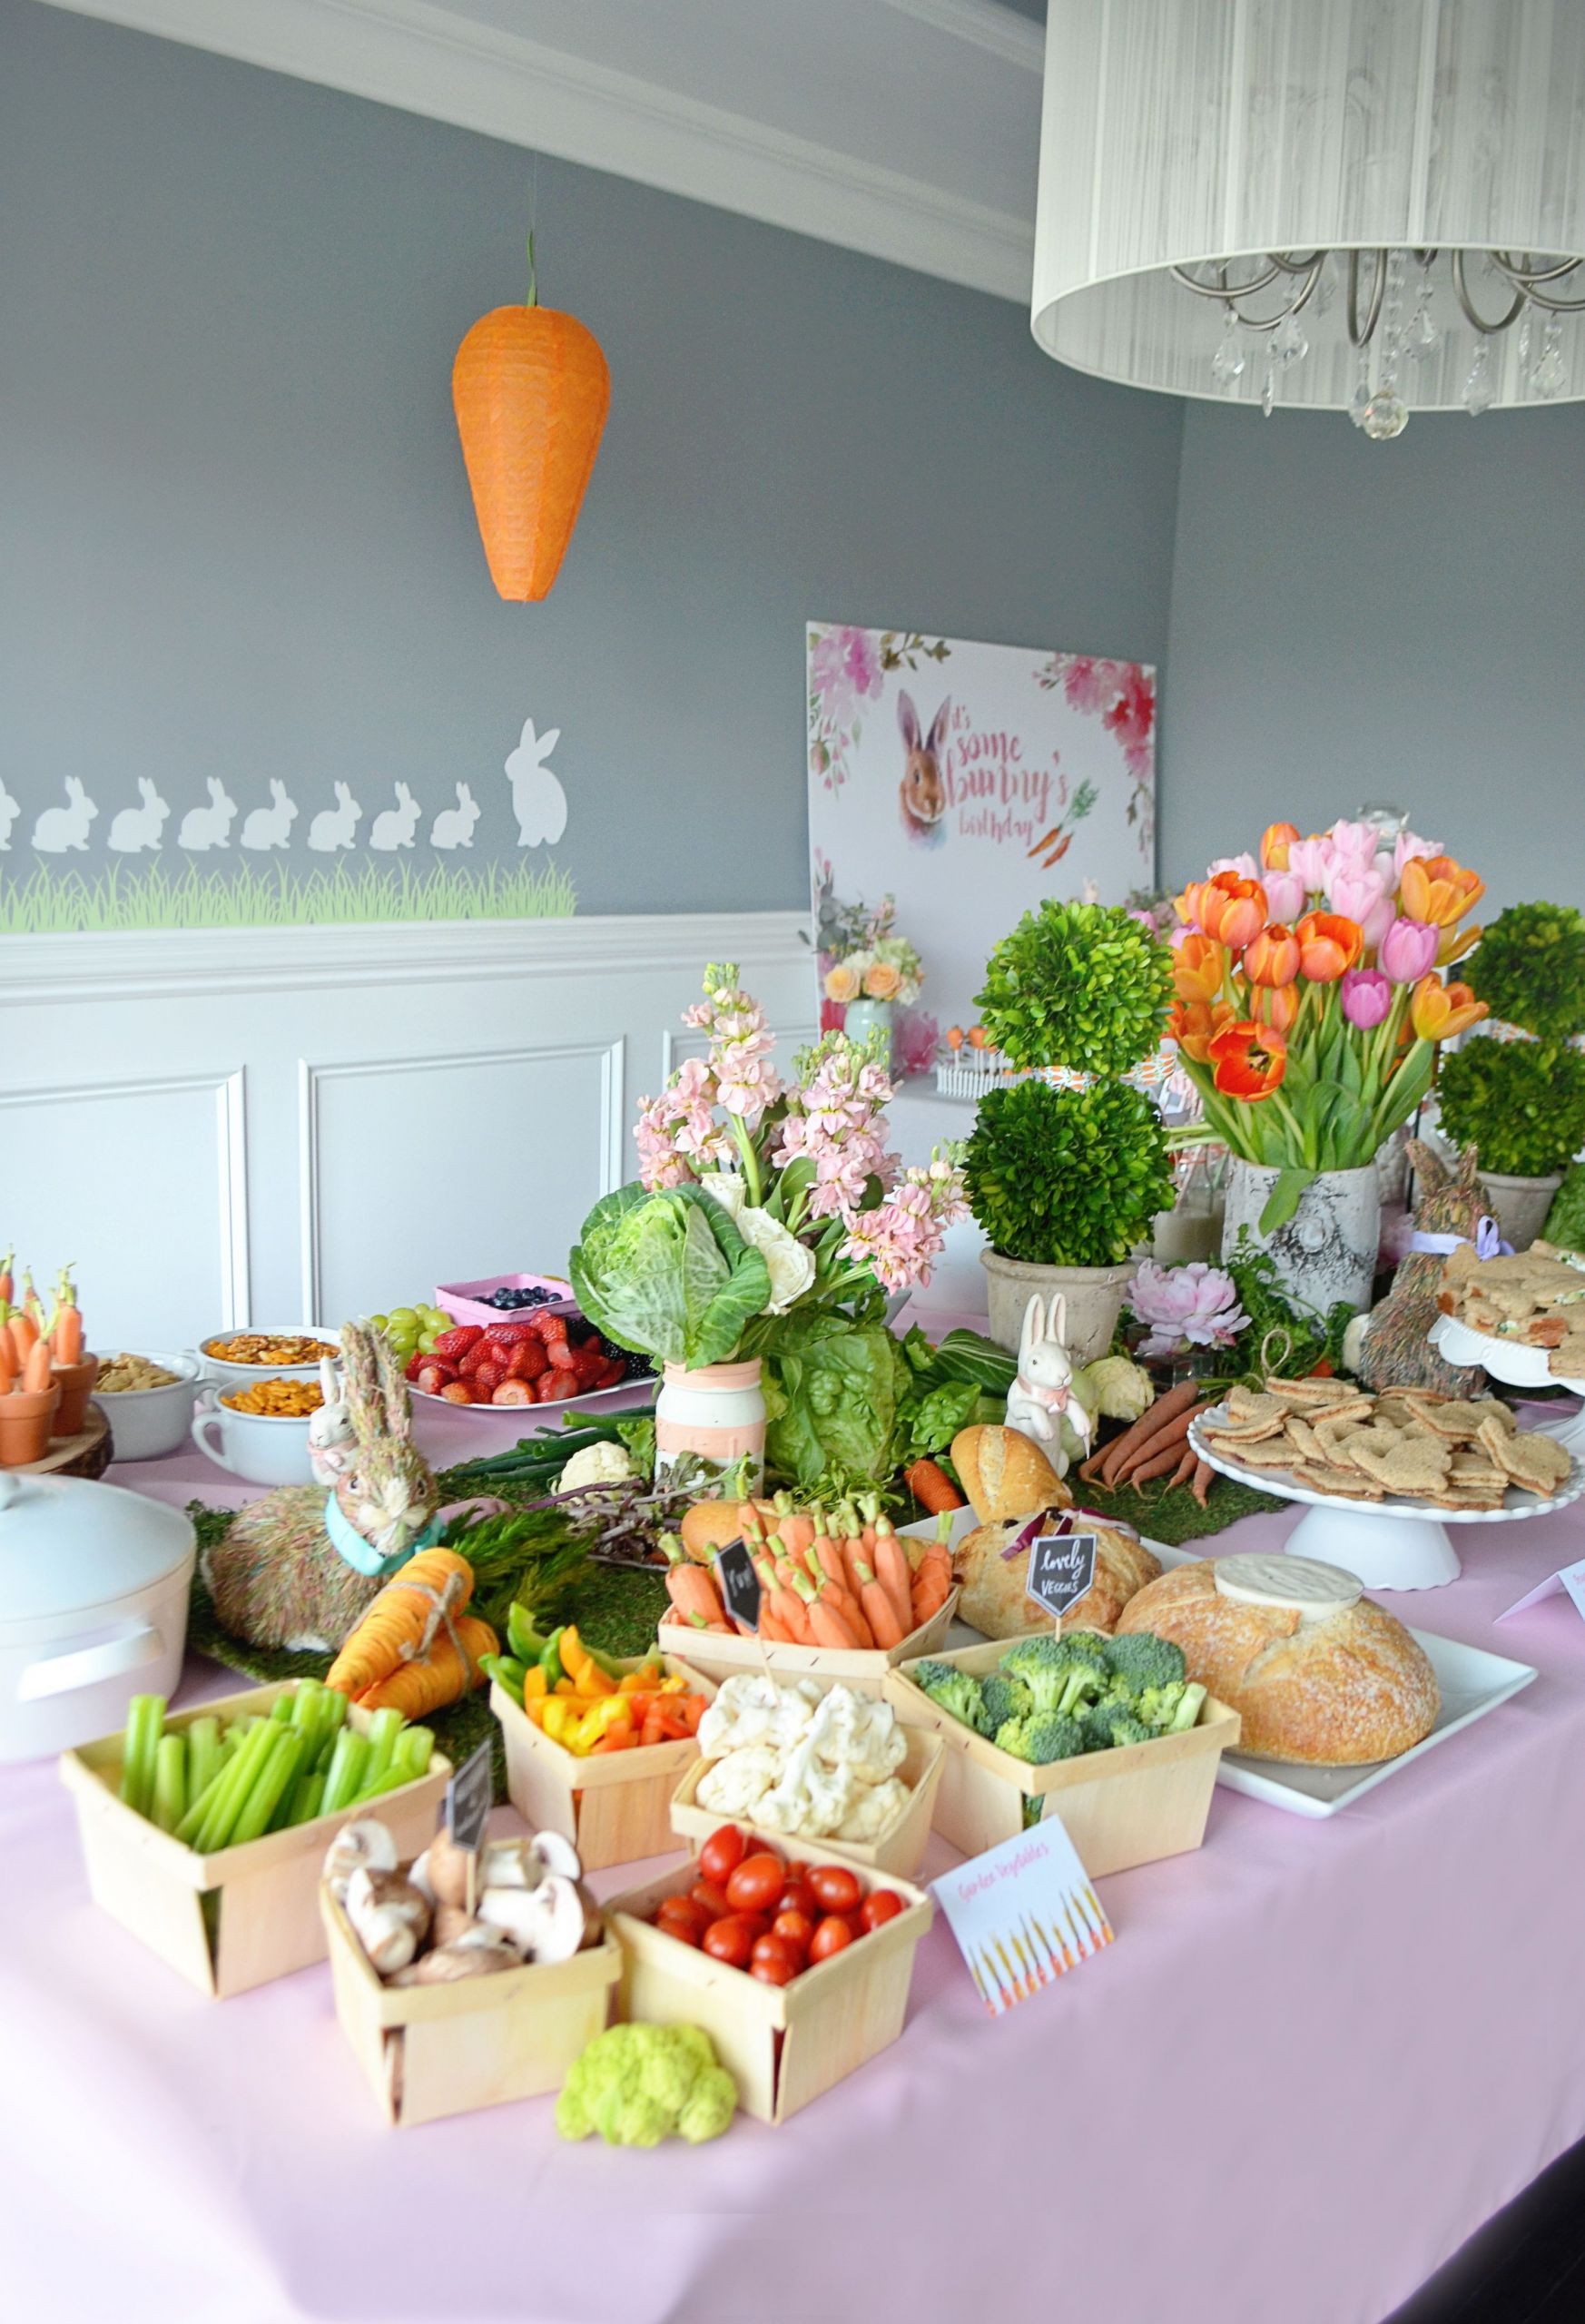 Classroom Easter Party Food Ideas
 Shop the Party Bunny Themed Party Project Nursery